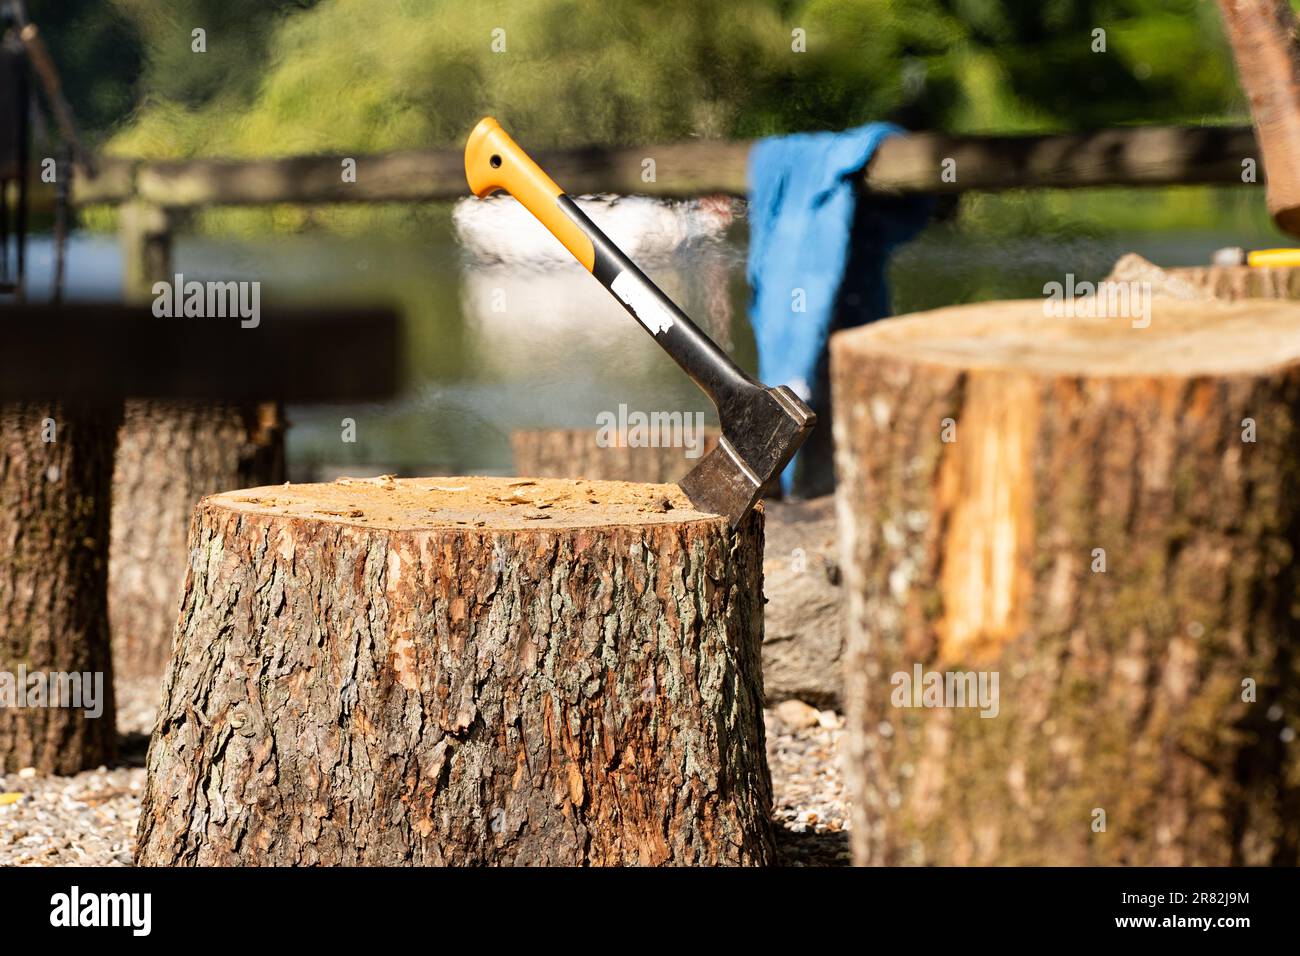 An axe with a wooden handle and a steel head, poised and ready to be used for cutting timber Stock Photo